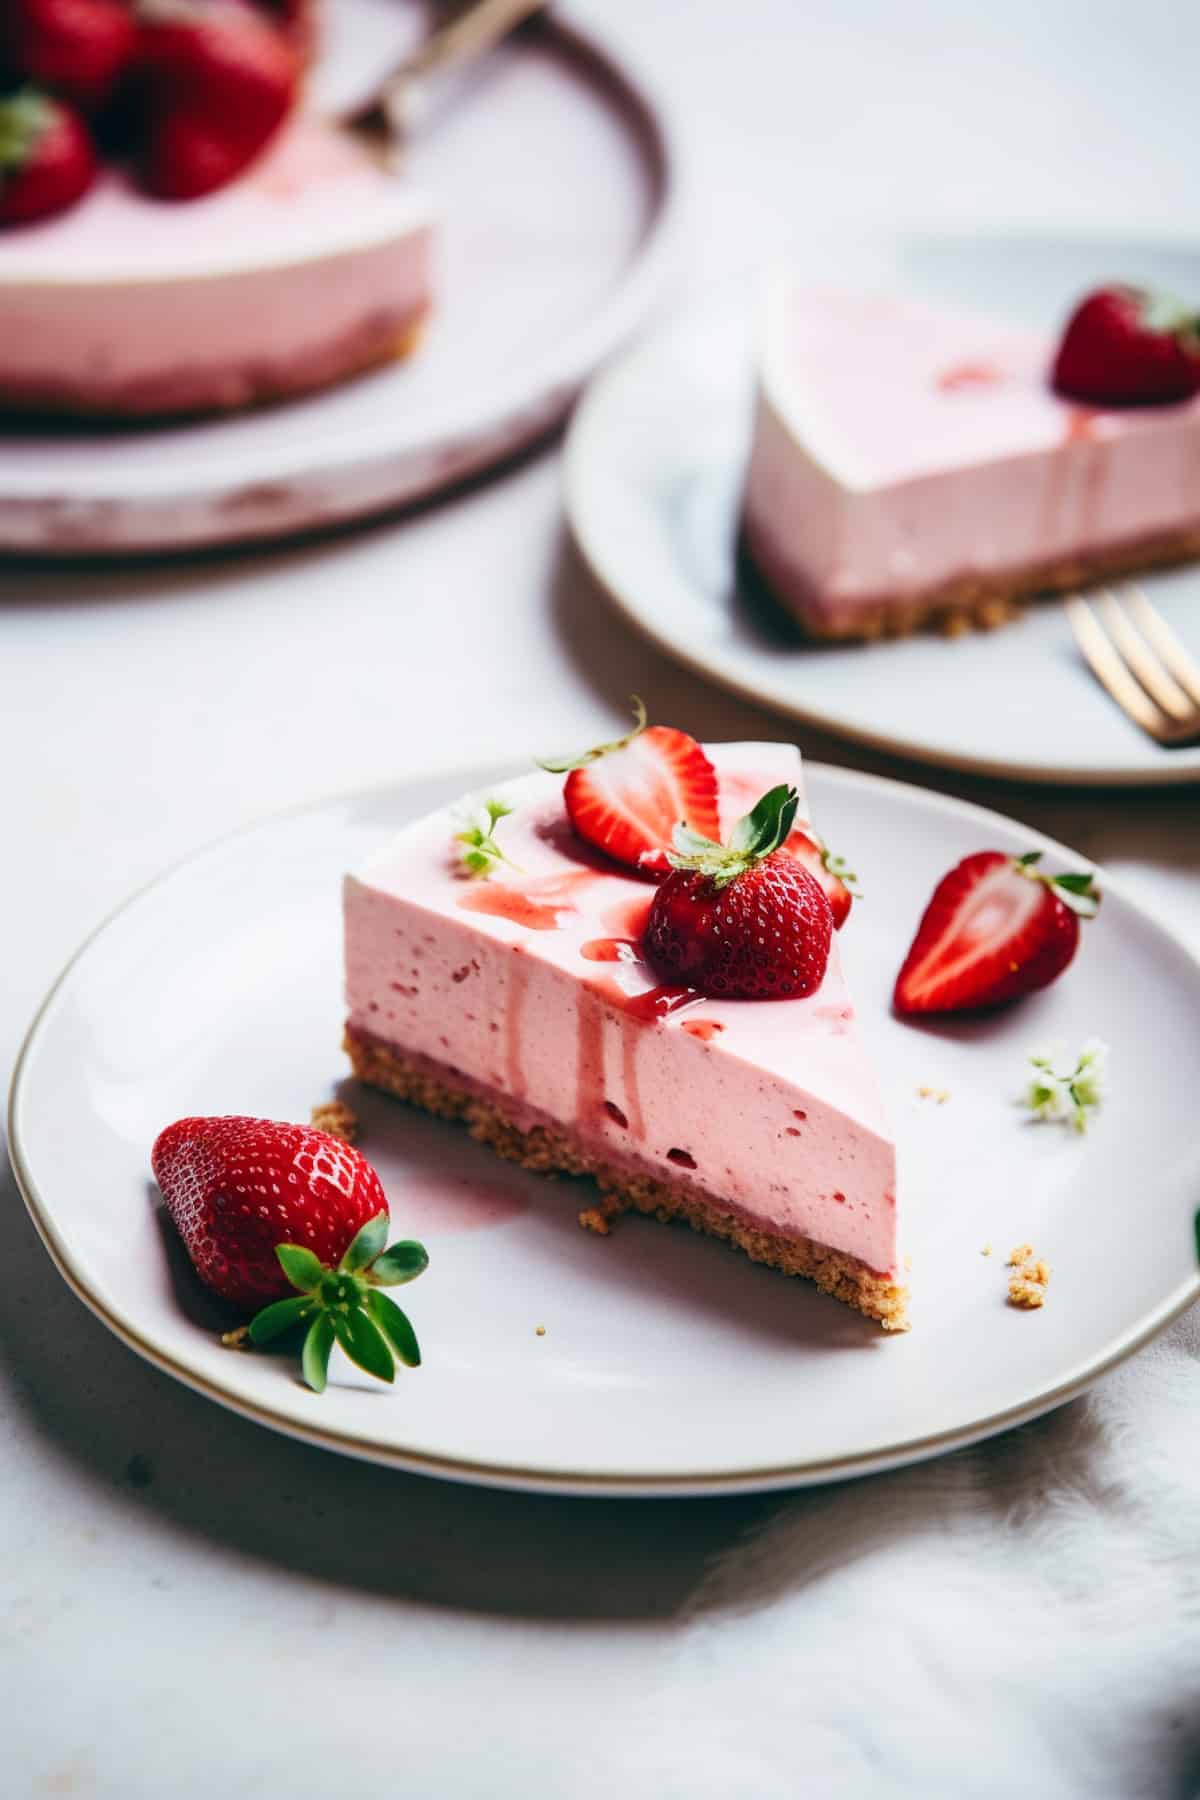 A slice of strawberry no bake cheesecake on a white plate.